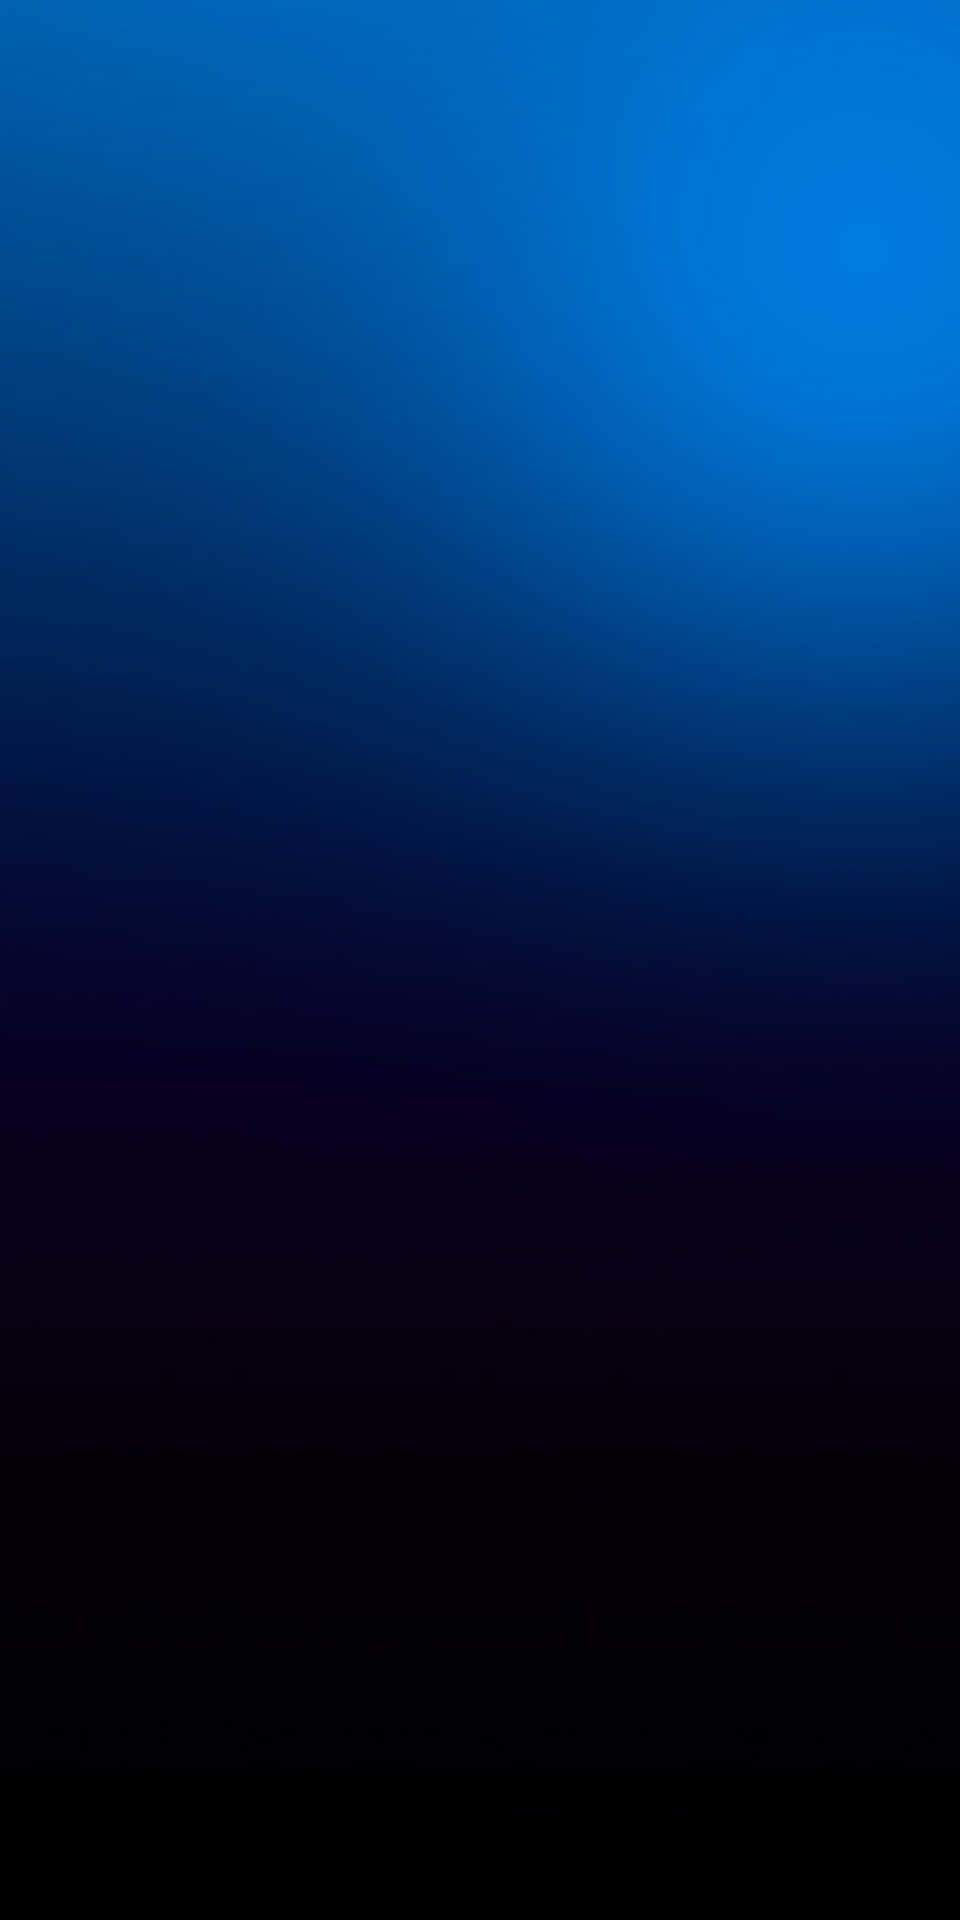 Download Blue Ombre Background Dark Blue To Black Theme | Wallpapers.Com